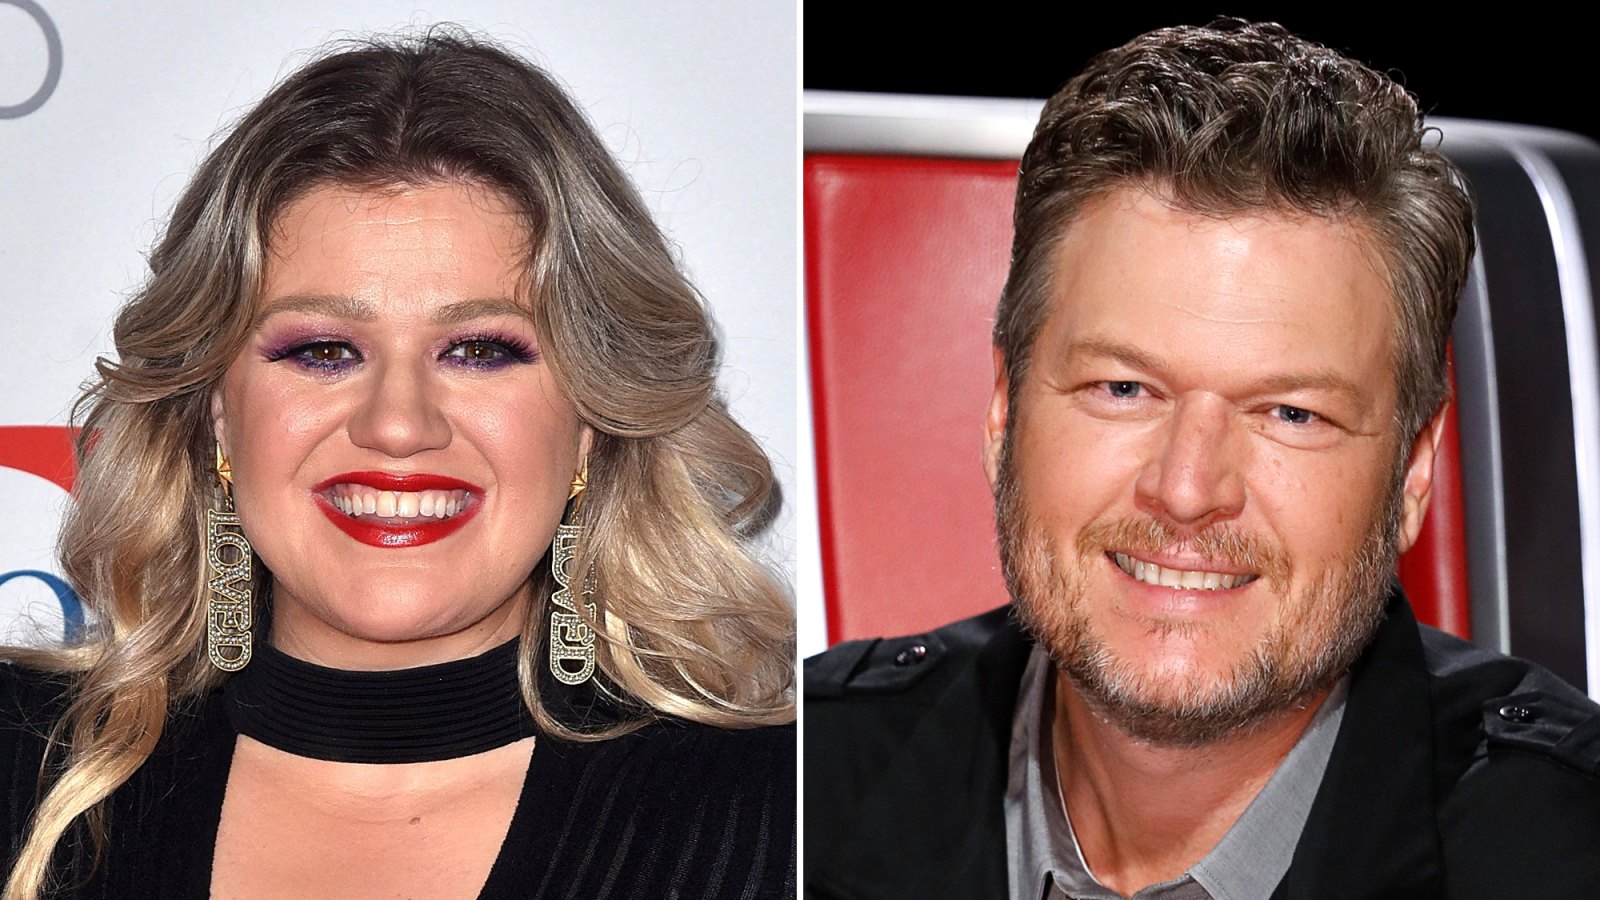 Kelly Clarkson Cheers On Blake Shelton At His Concert With Friends: 'Livin Our Best Lives!'